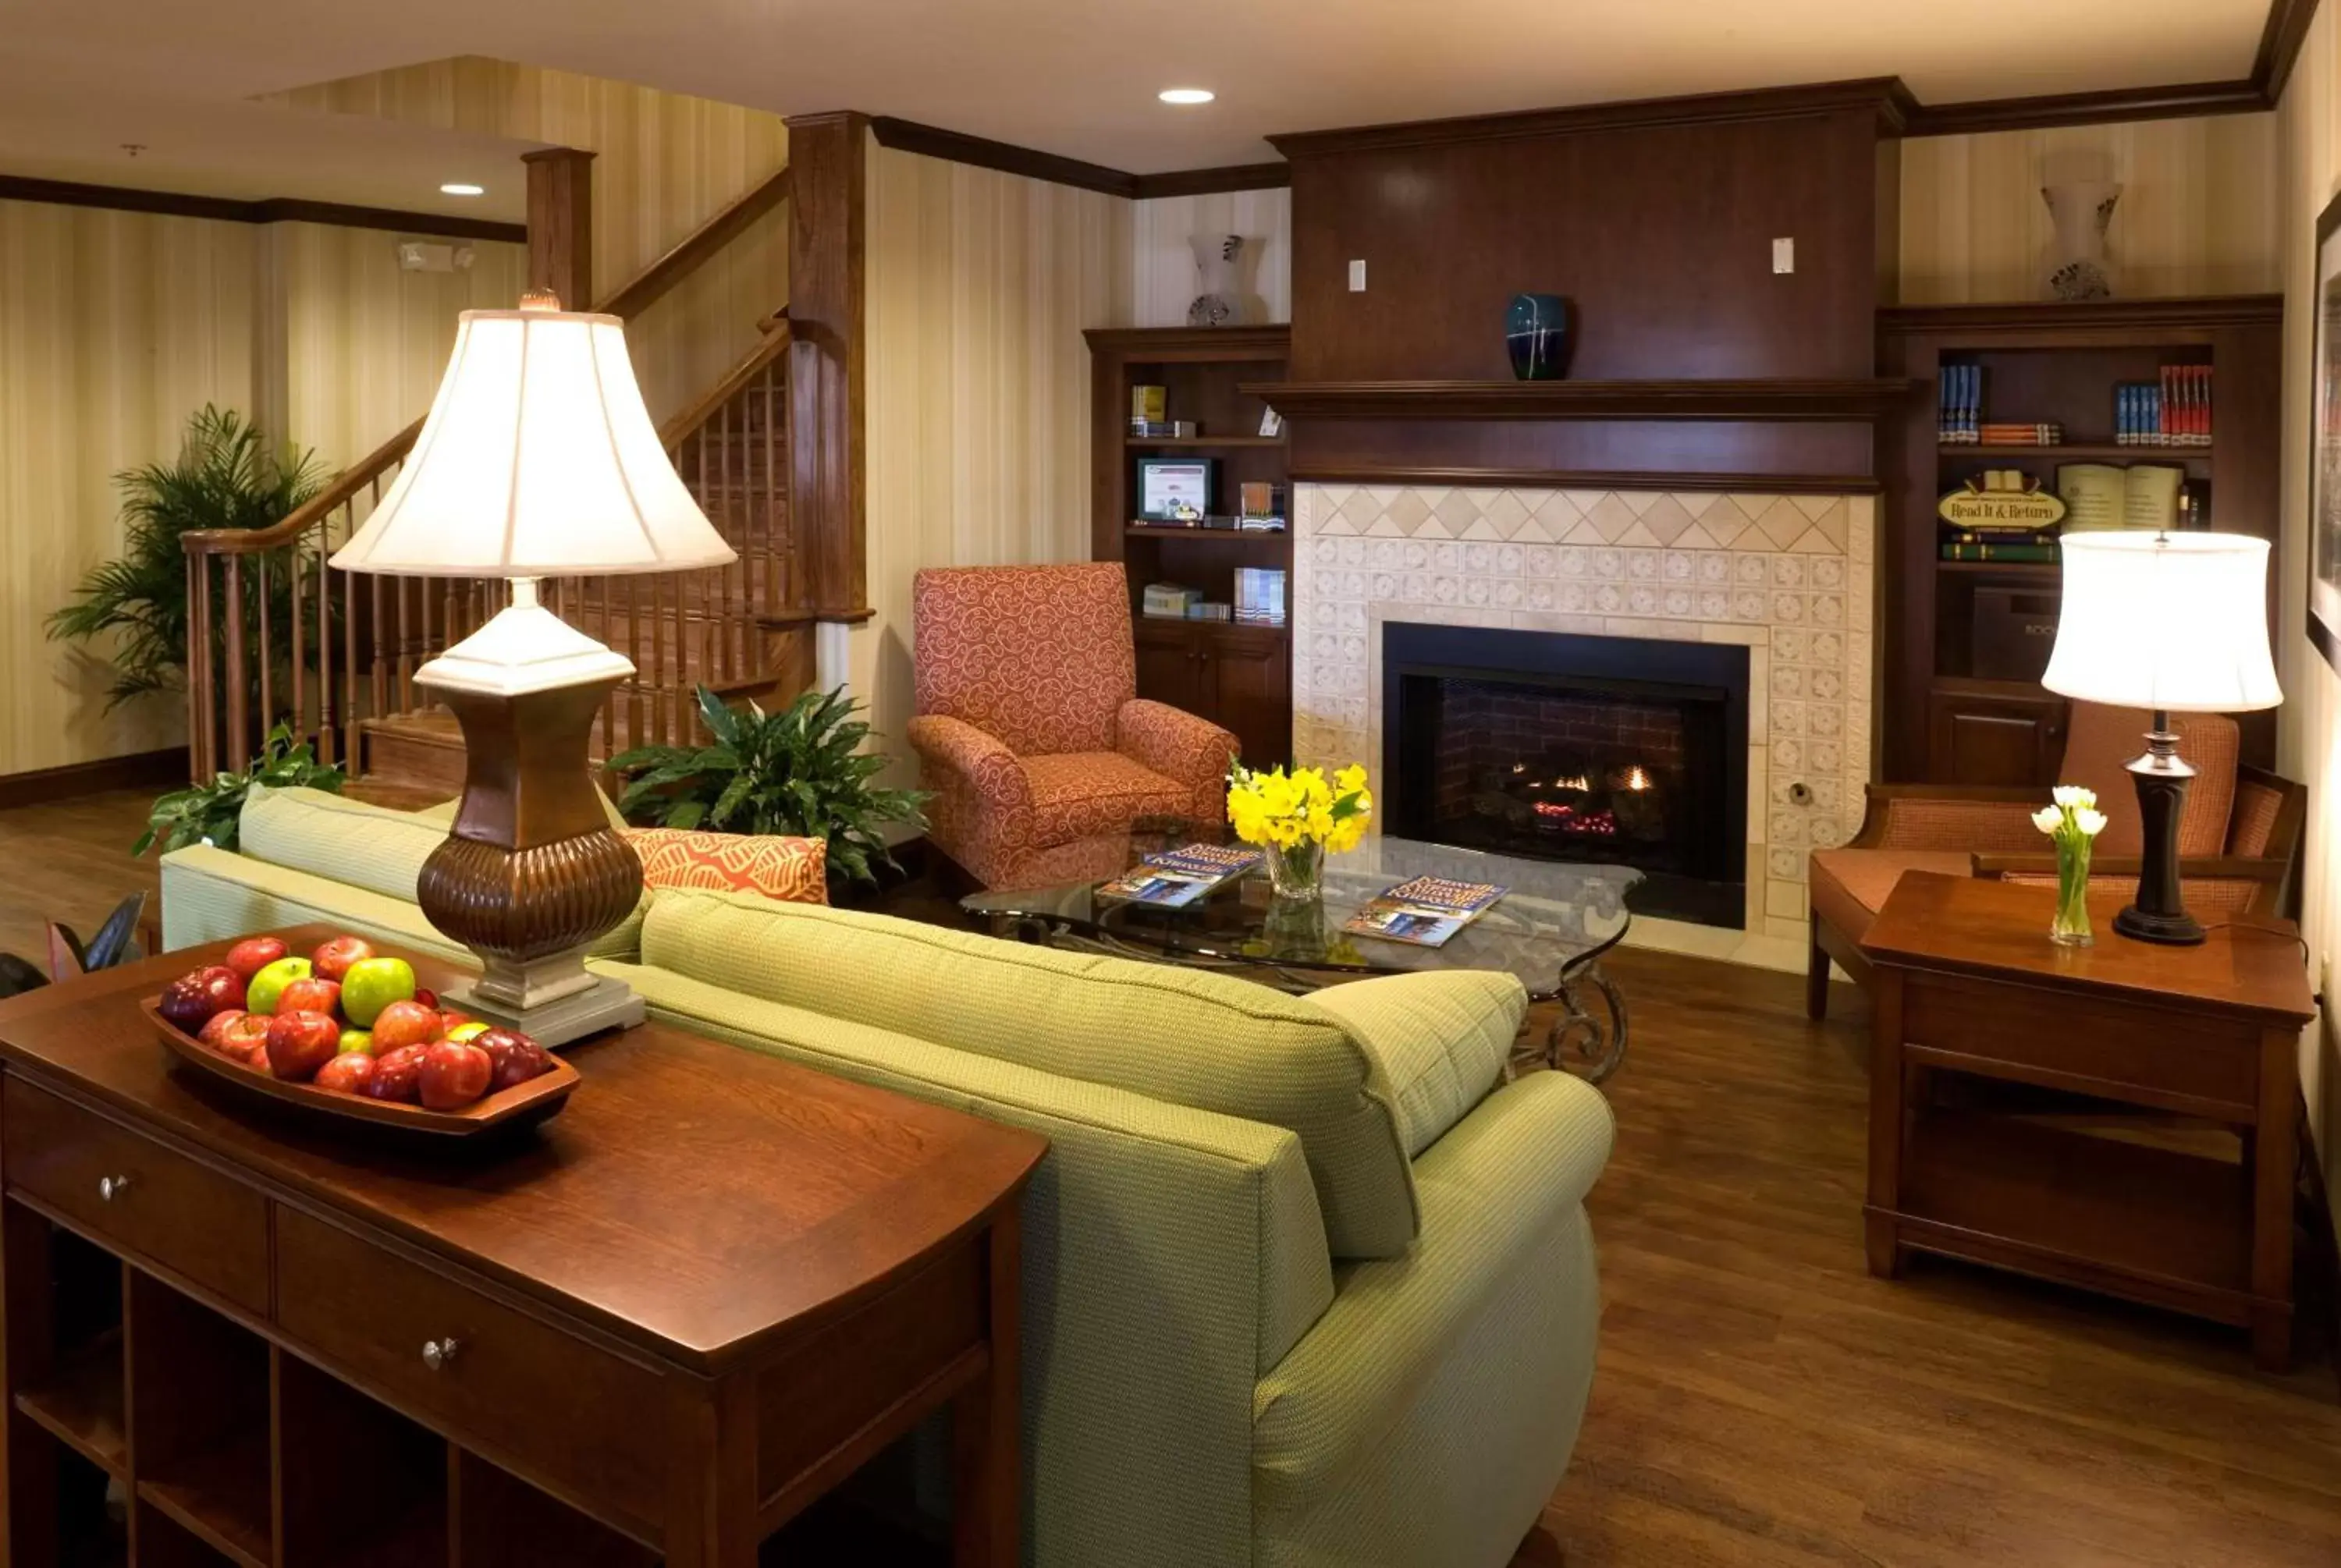 Lobby or reception in Country Inn & Suites by Radisson, Knoxville at Cedar Bluff, TN